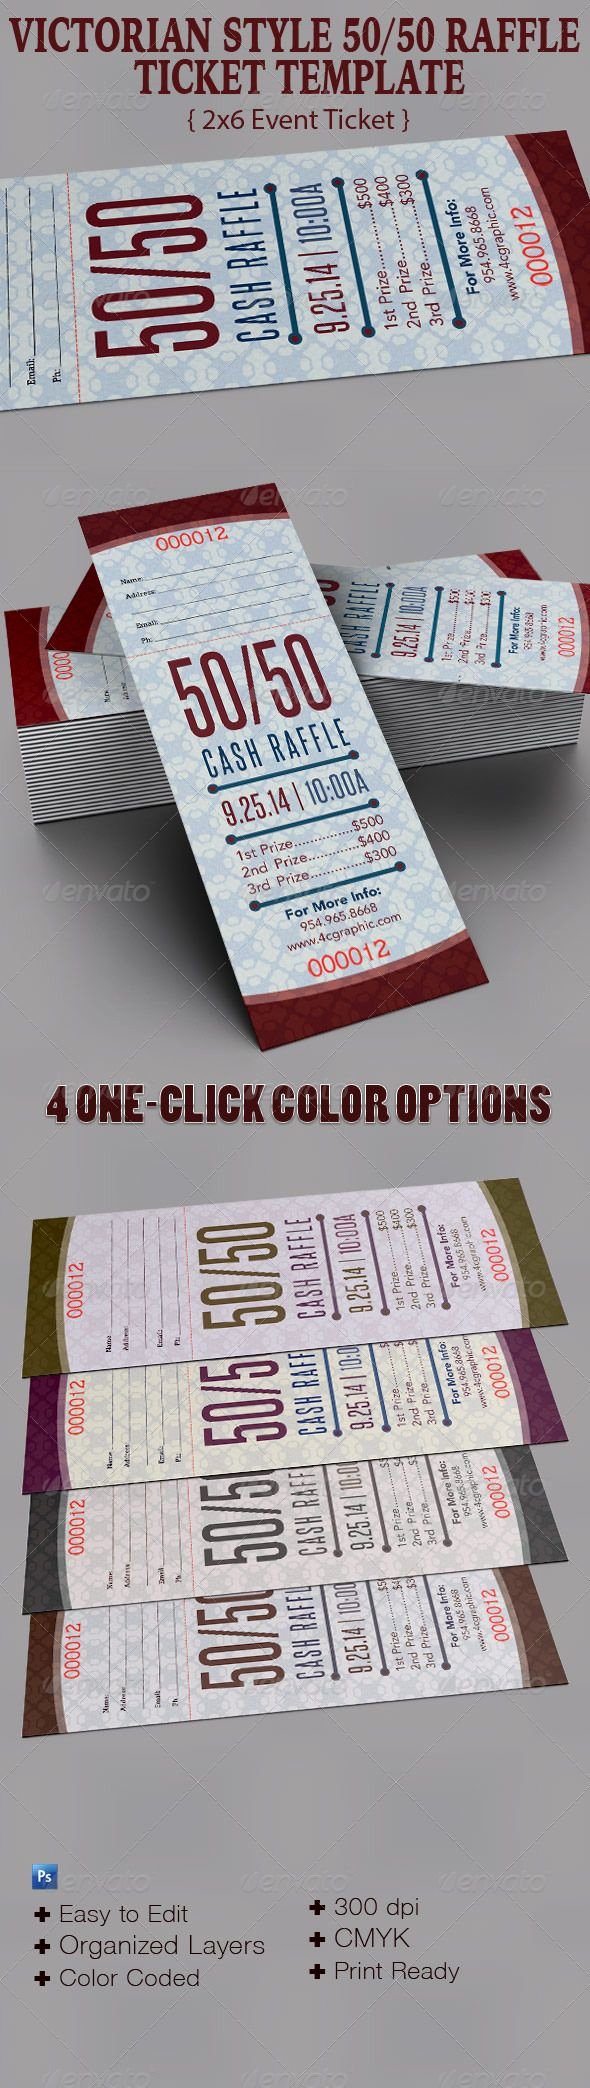 Fish Fry Flyer Microsoft Word Awesome Victorian Style Fifty Fifty Ticket Template events